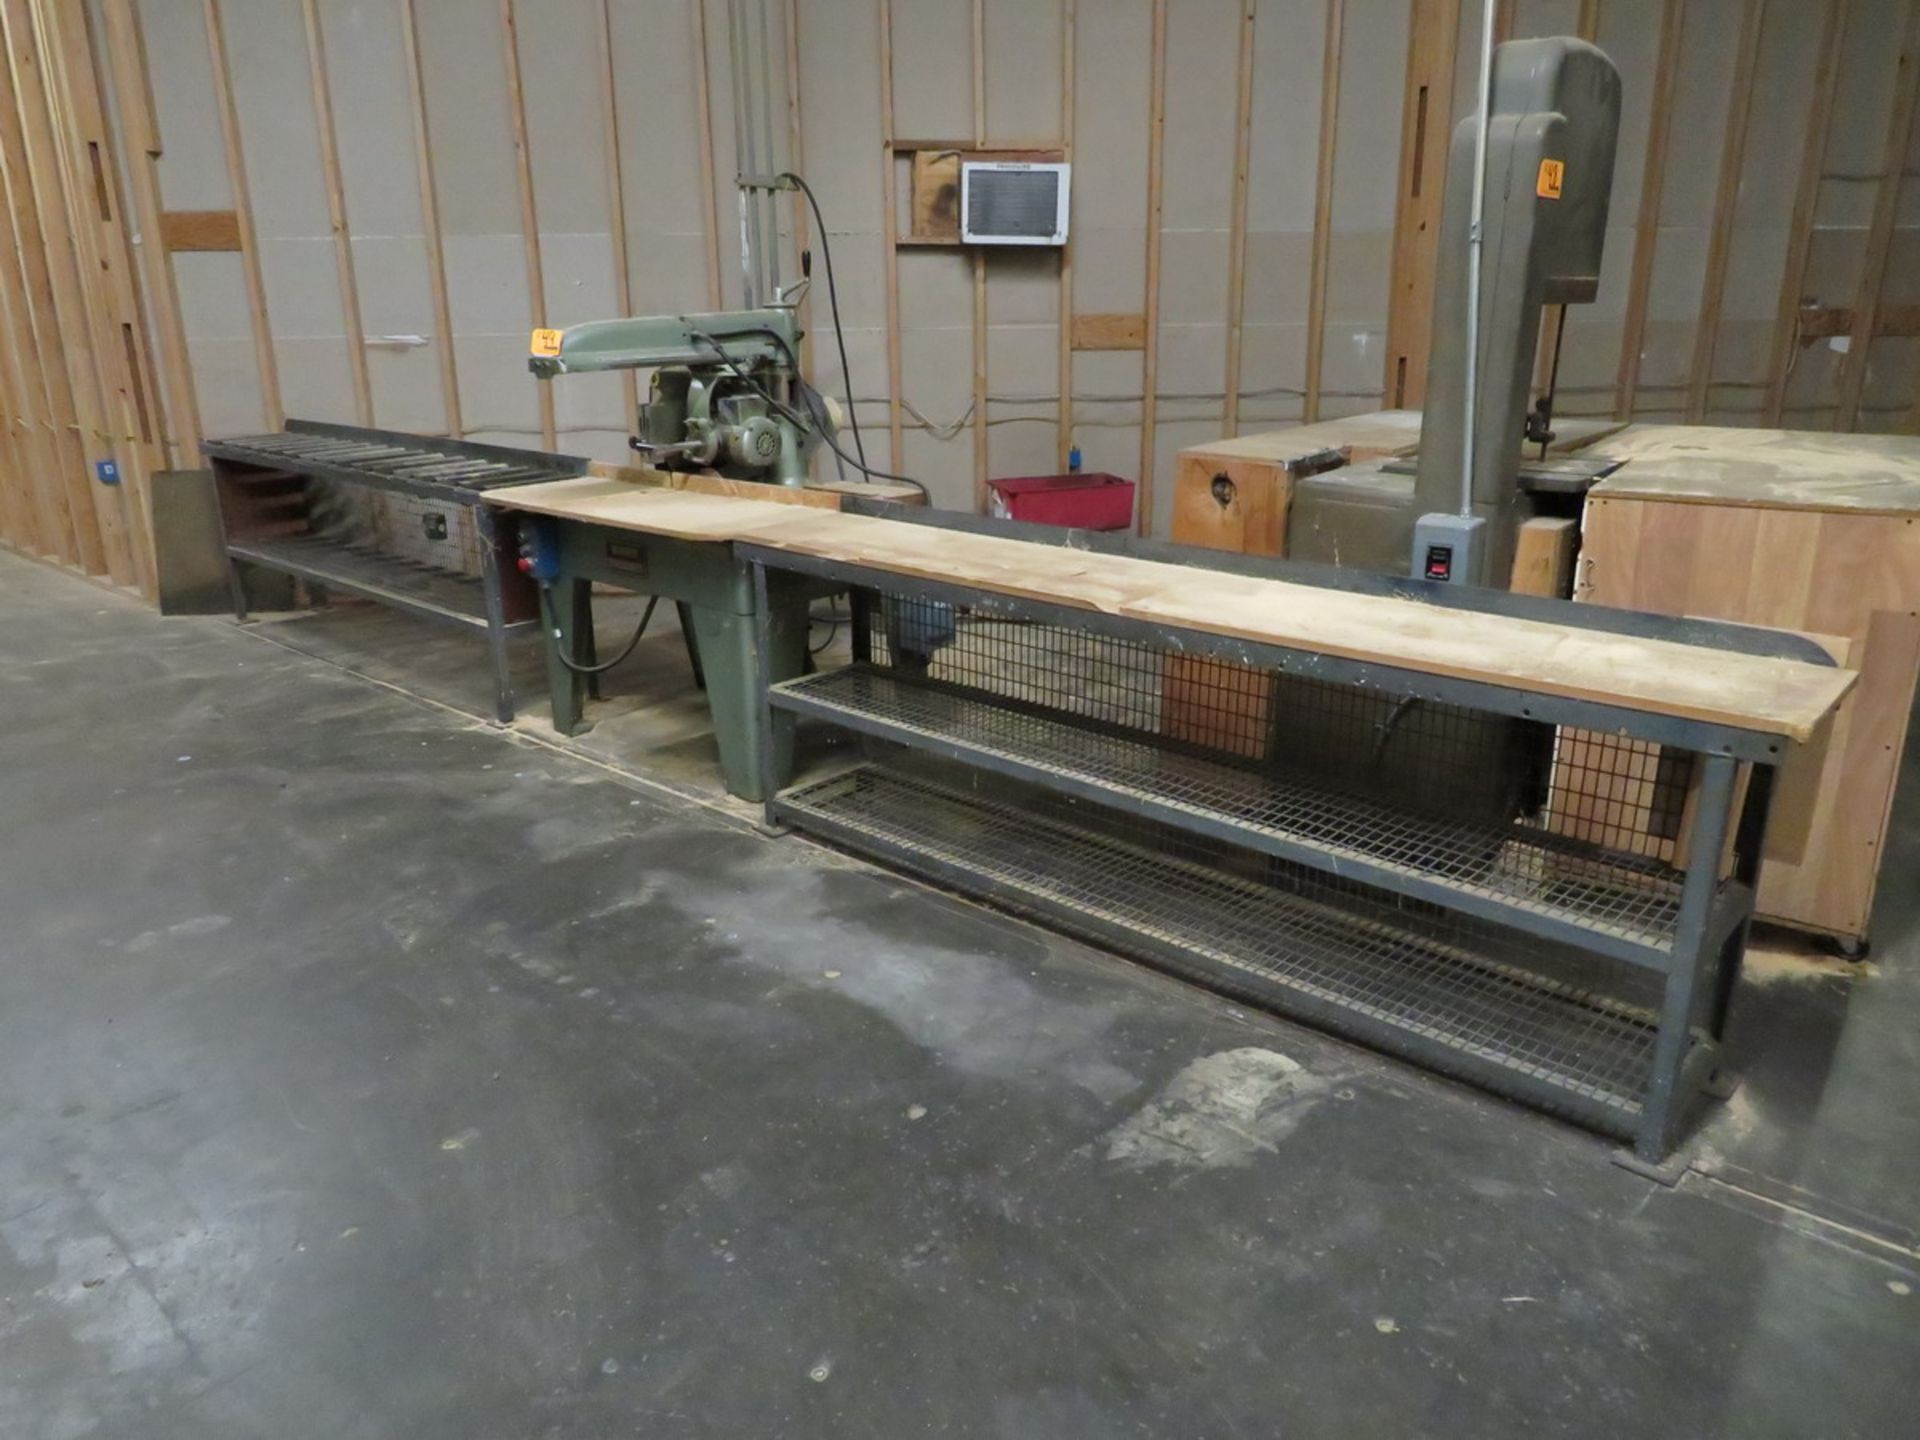 Wadkin Bursgreen Radial Saw 10", with Support Stand and Conveyor [Loc: Church Hill]